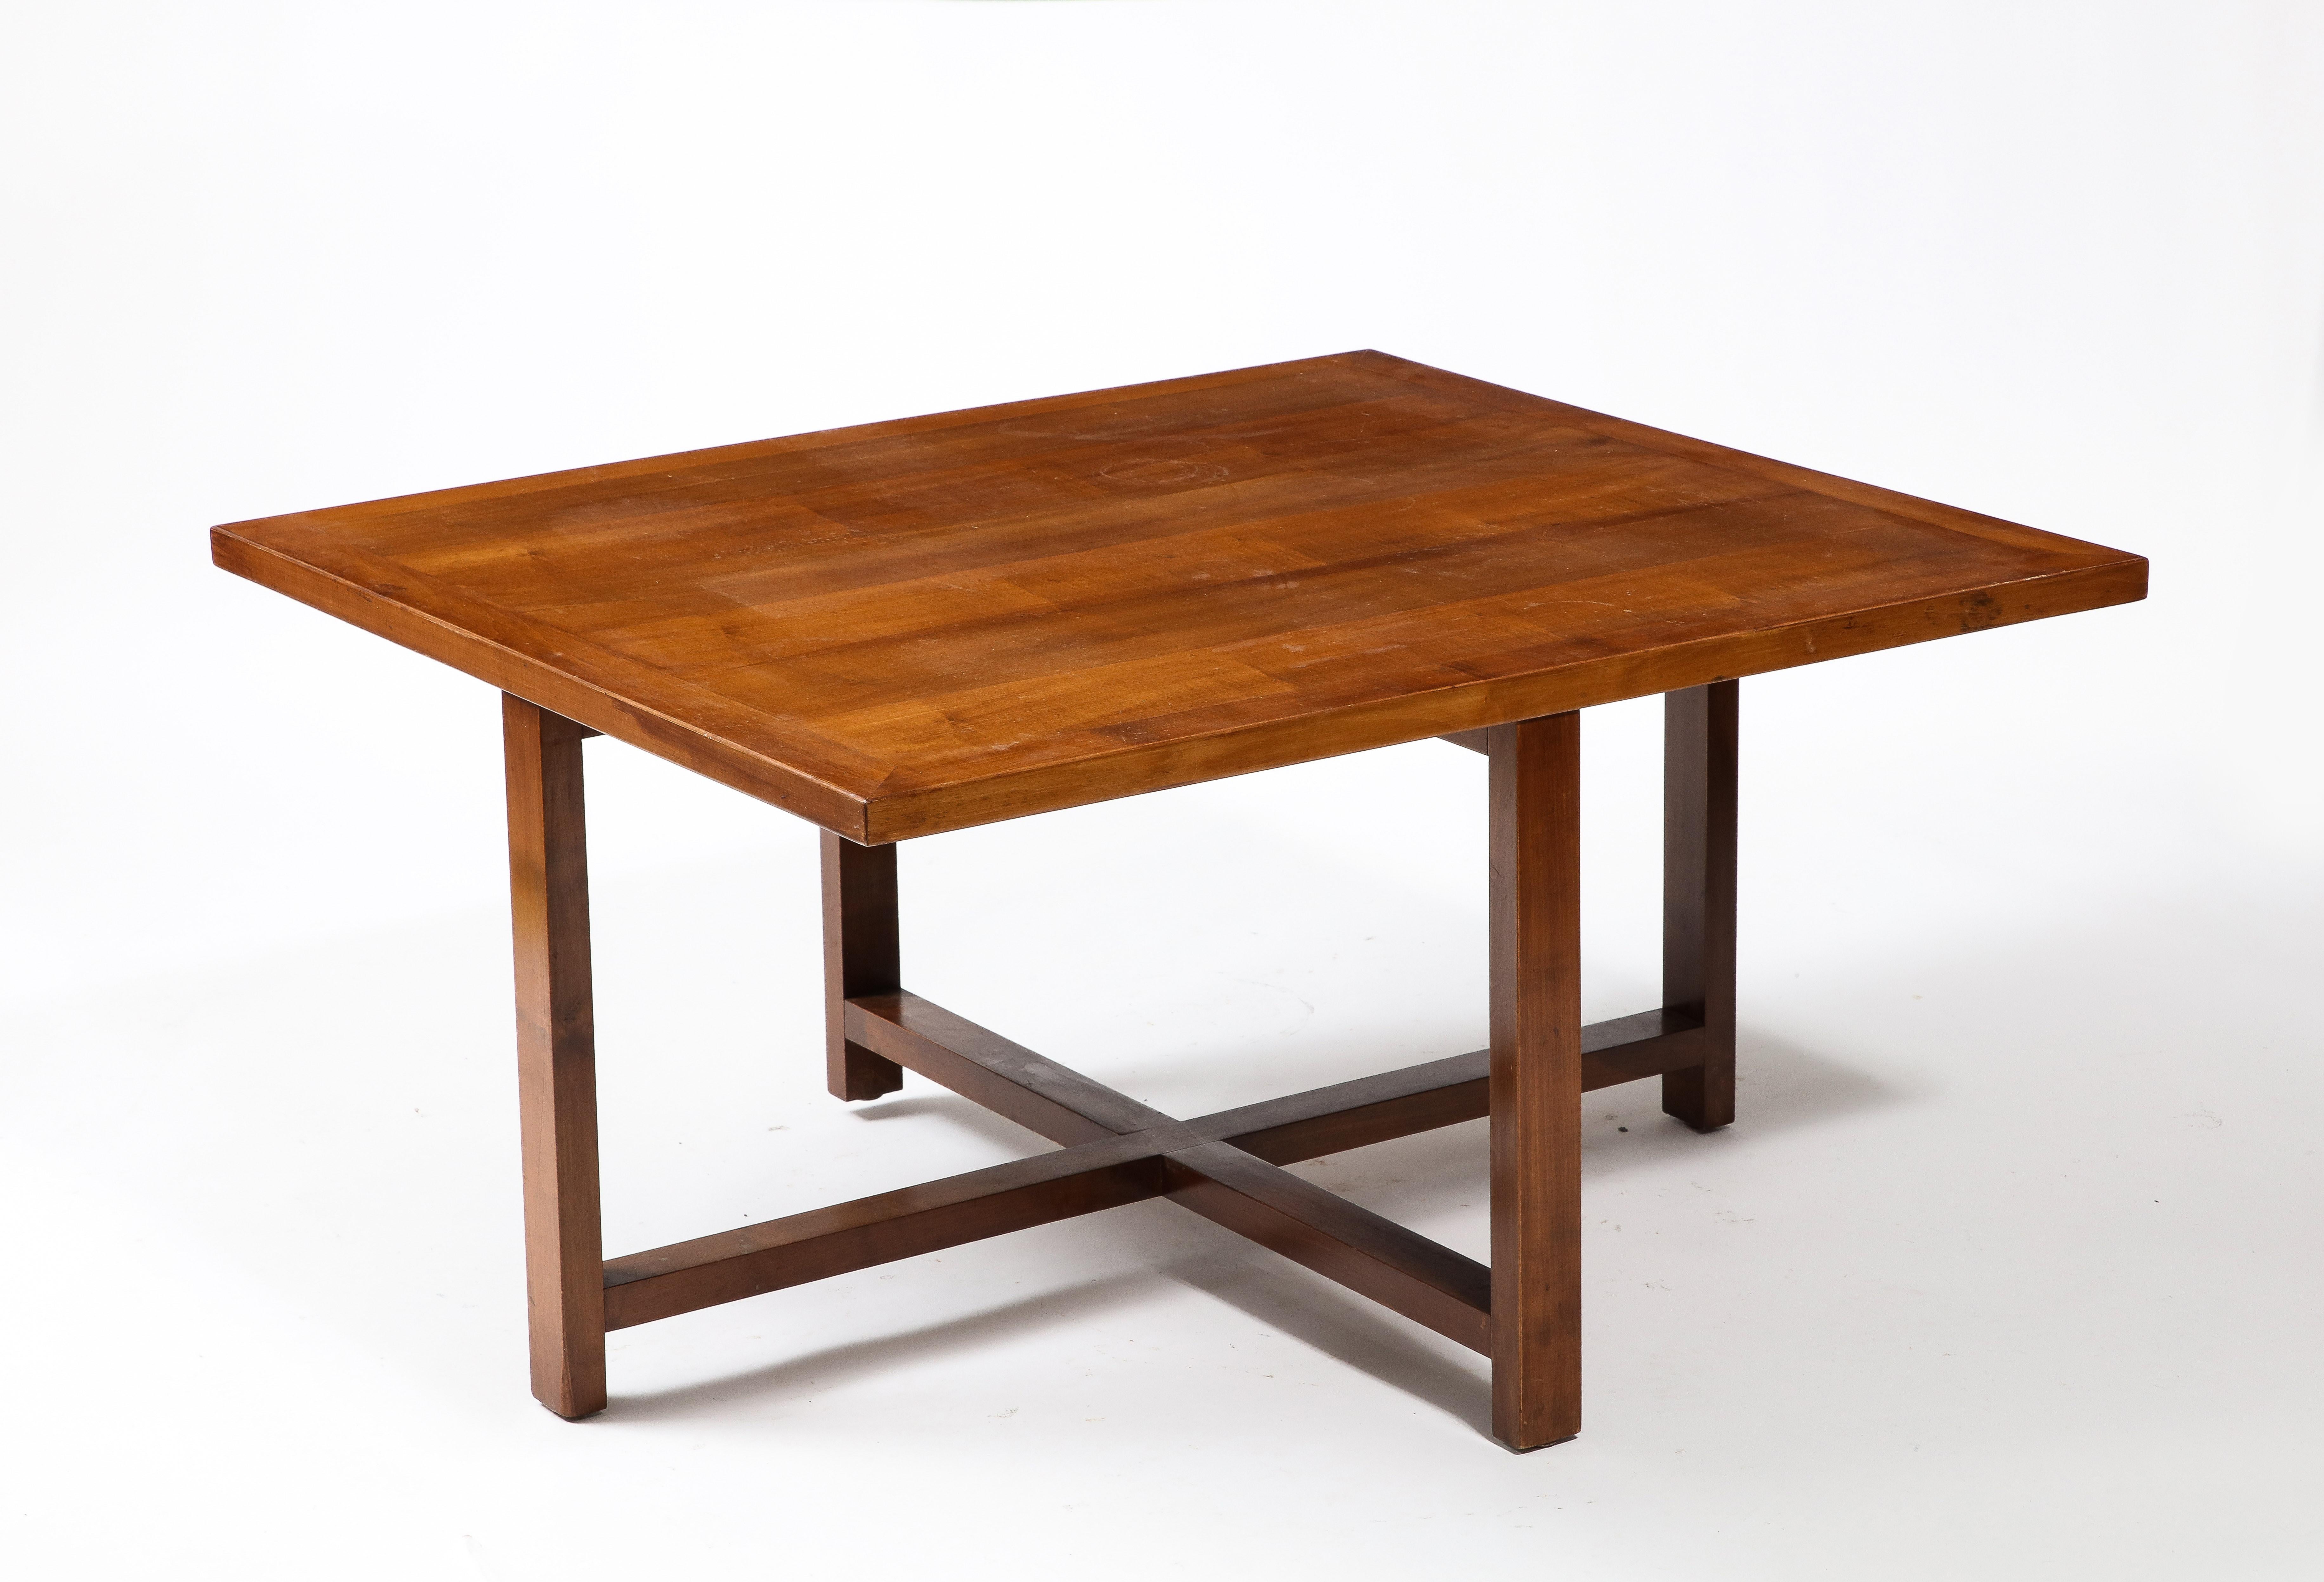 Unusual coffee table with nesting stools, walnut & leather.